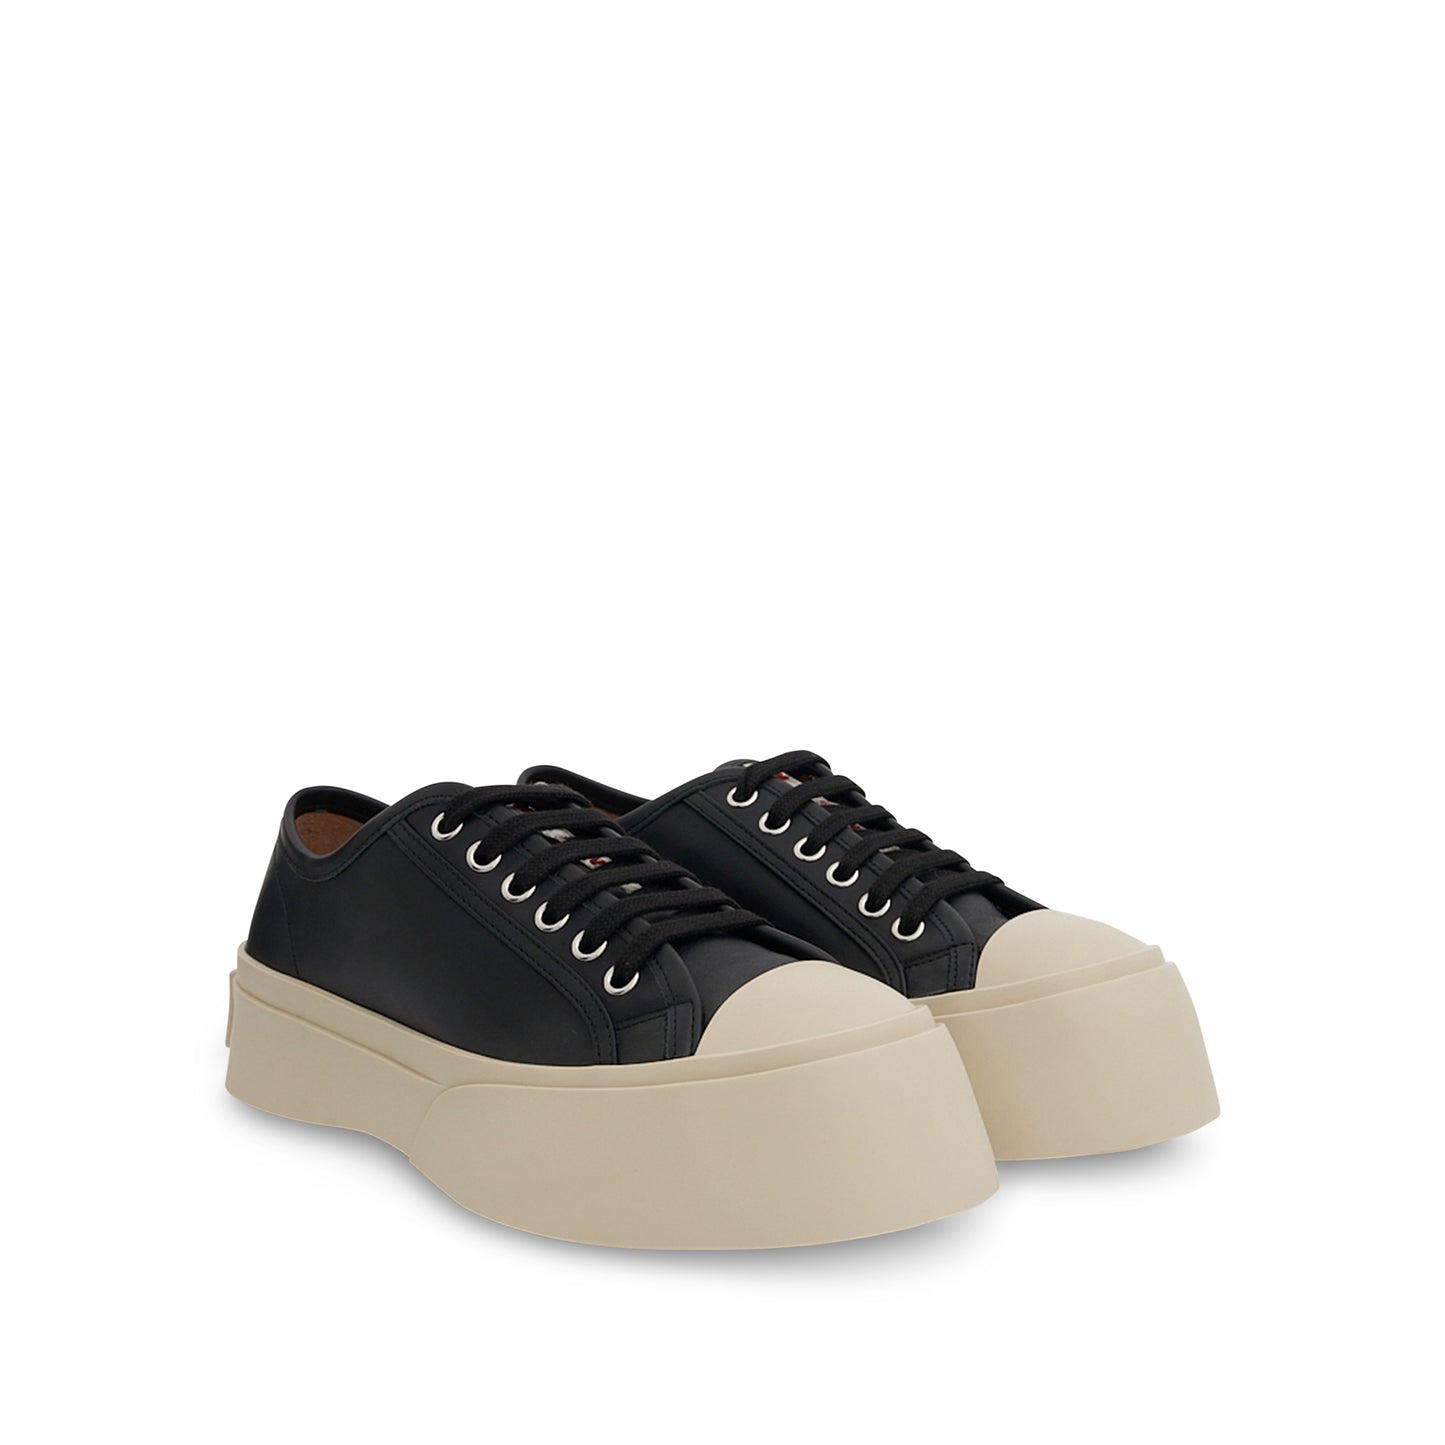 Pablo Lace Up Sneaker in Black